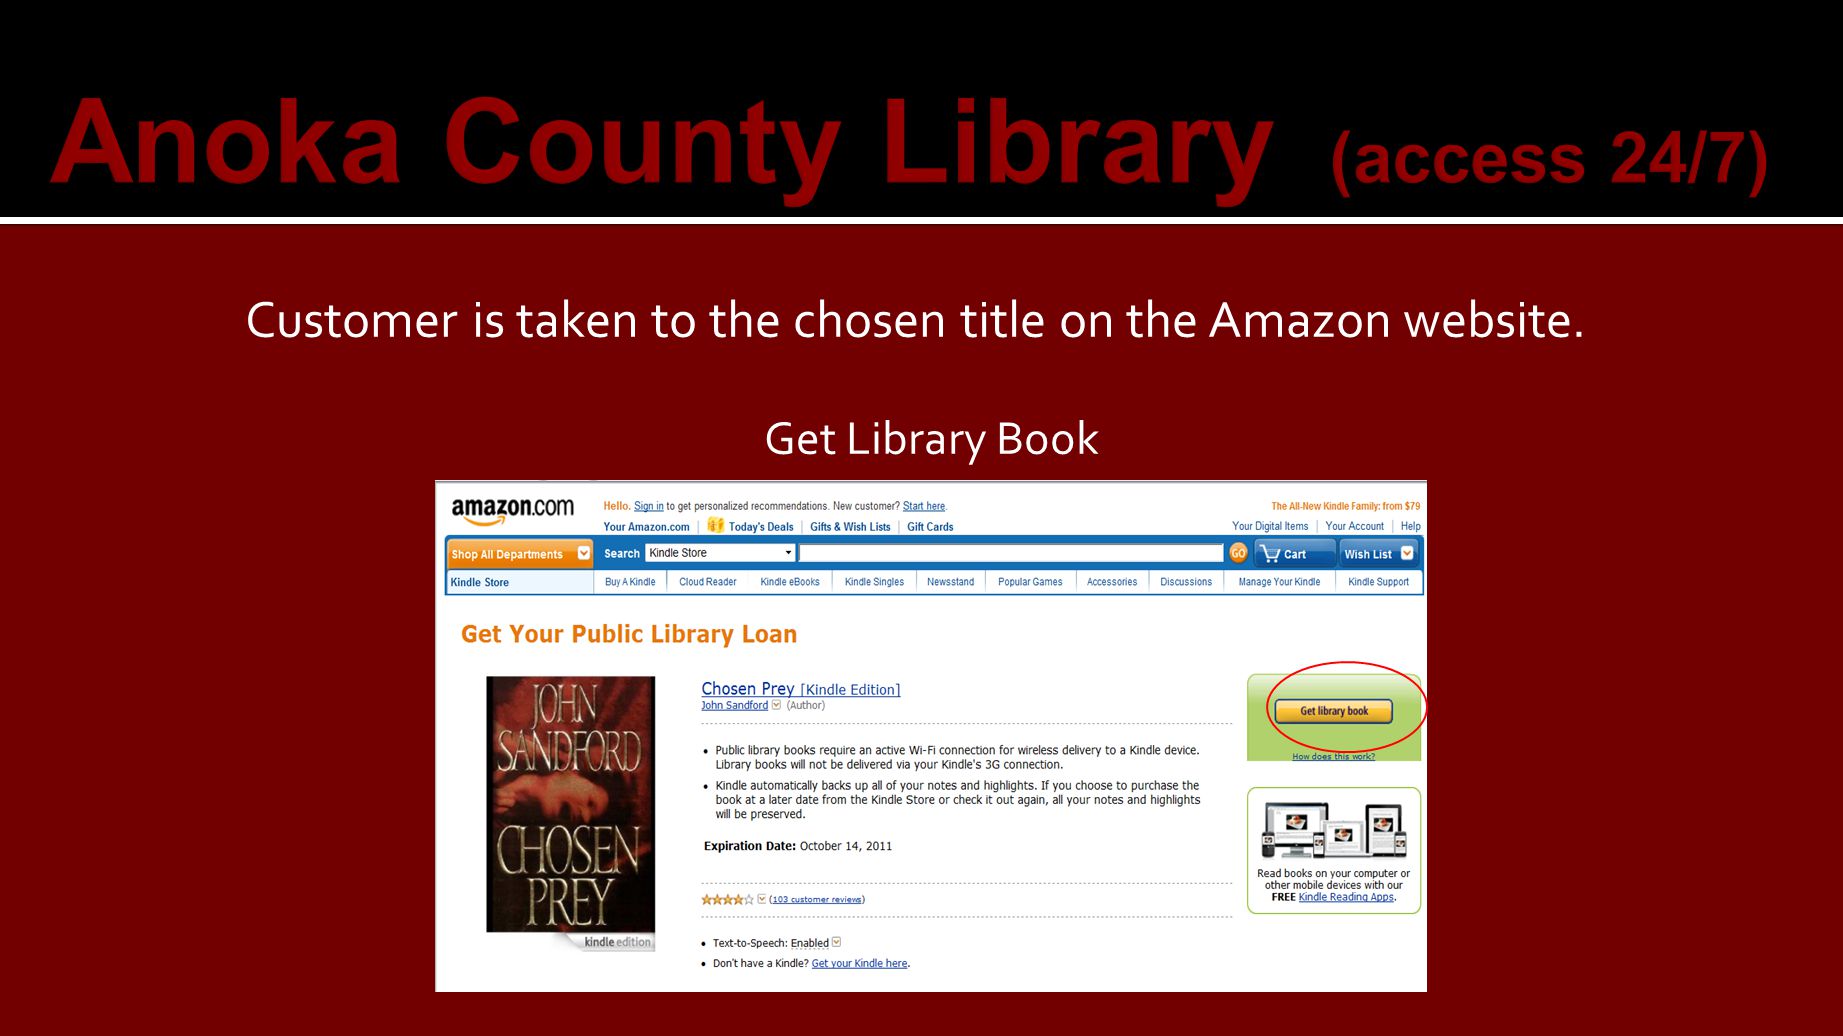 Anoka County Library (access 24/7) Customer is taken to the chosen title on the Amazon website.